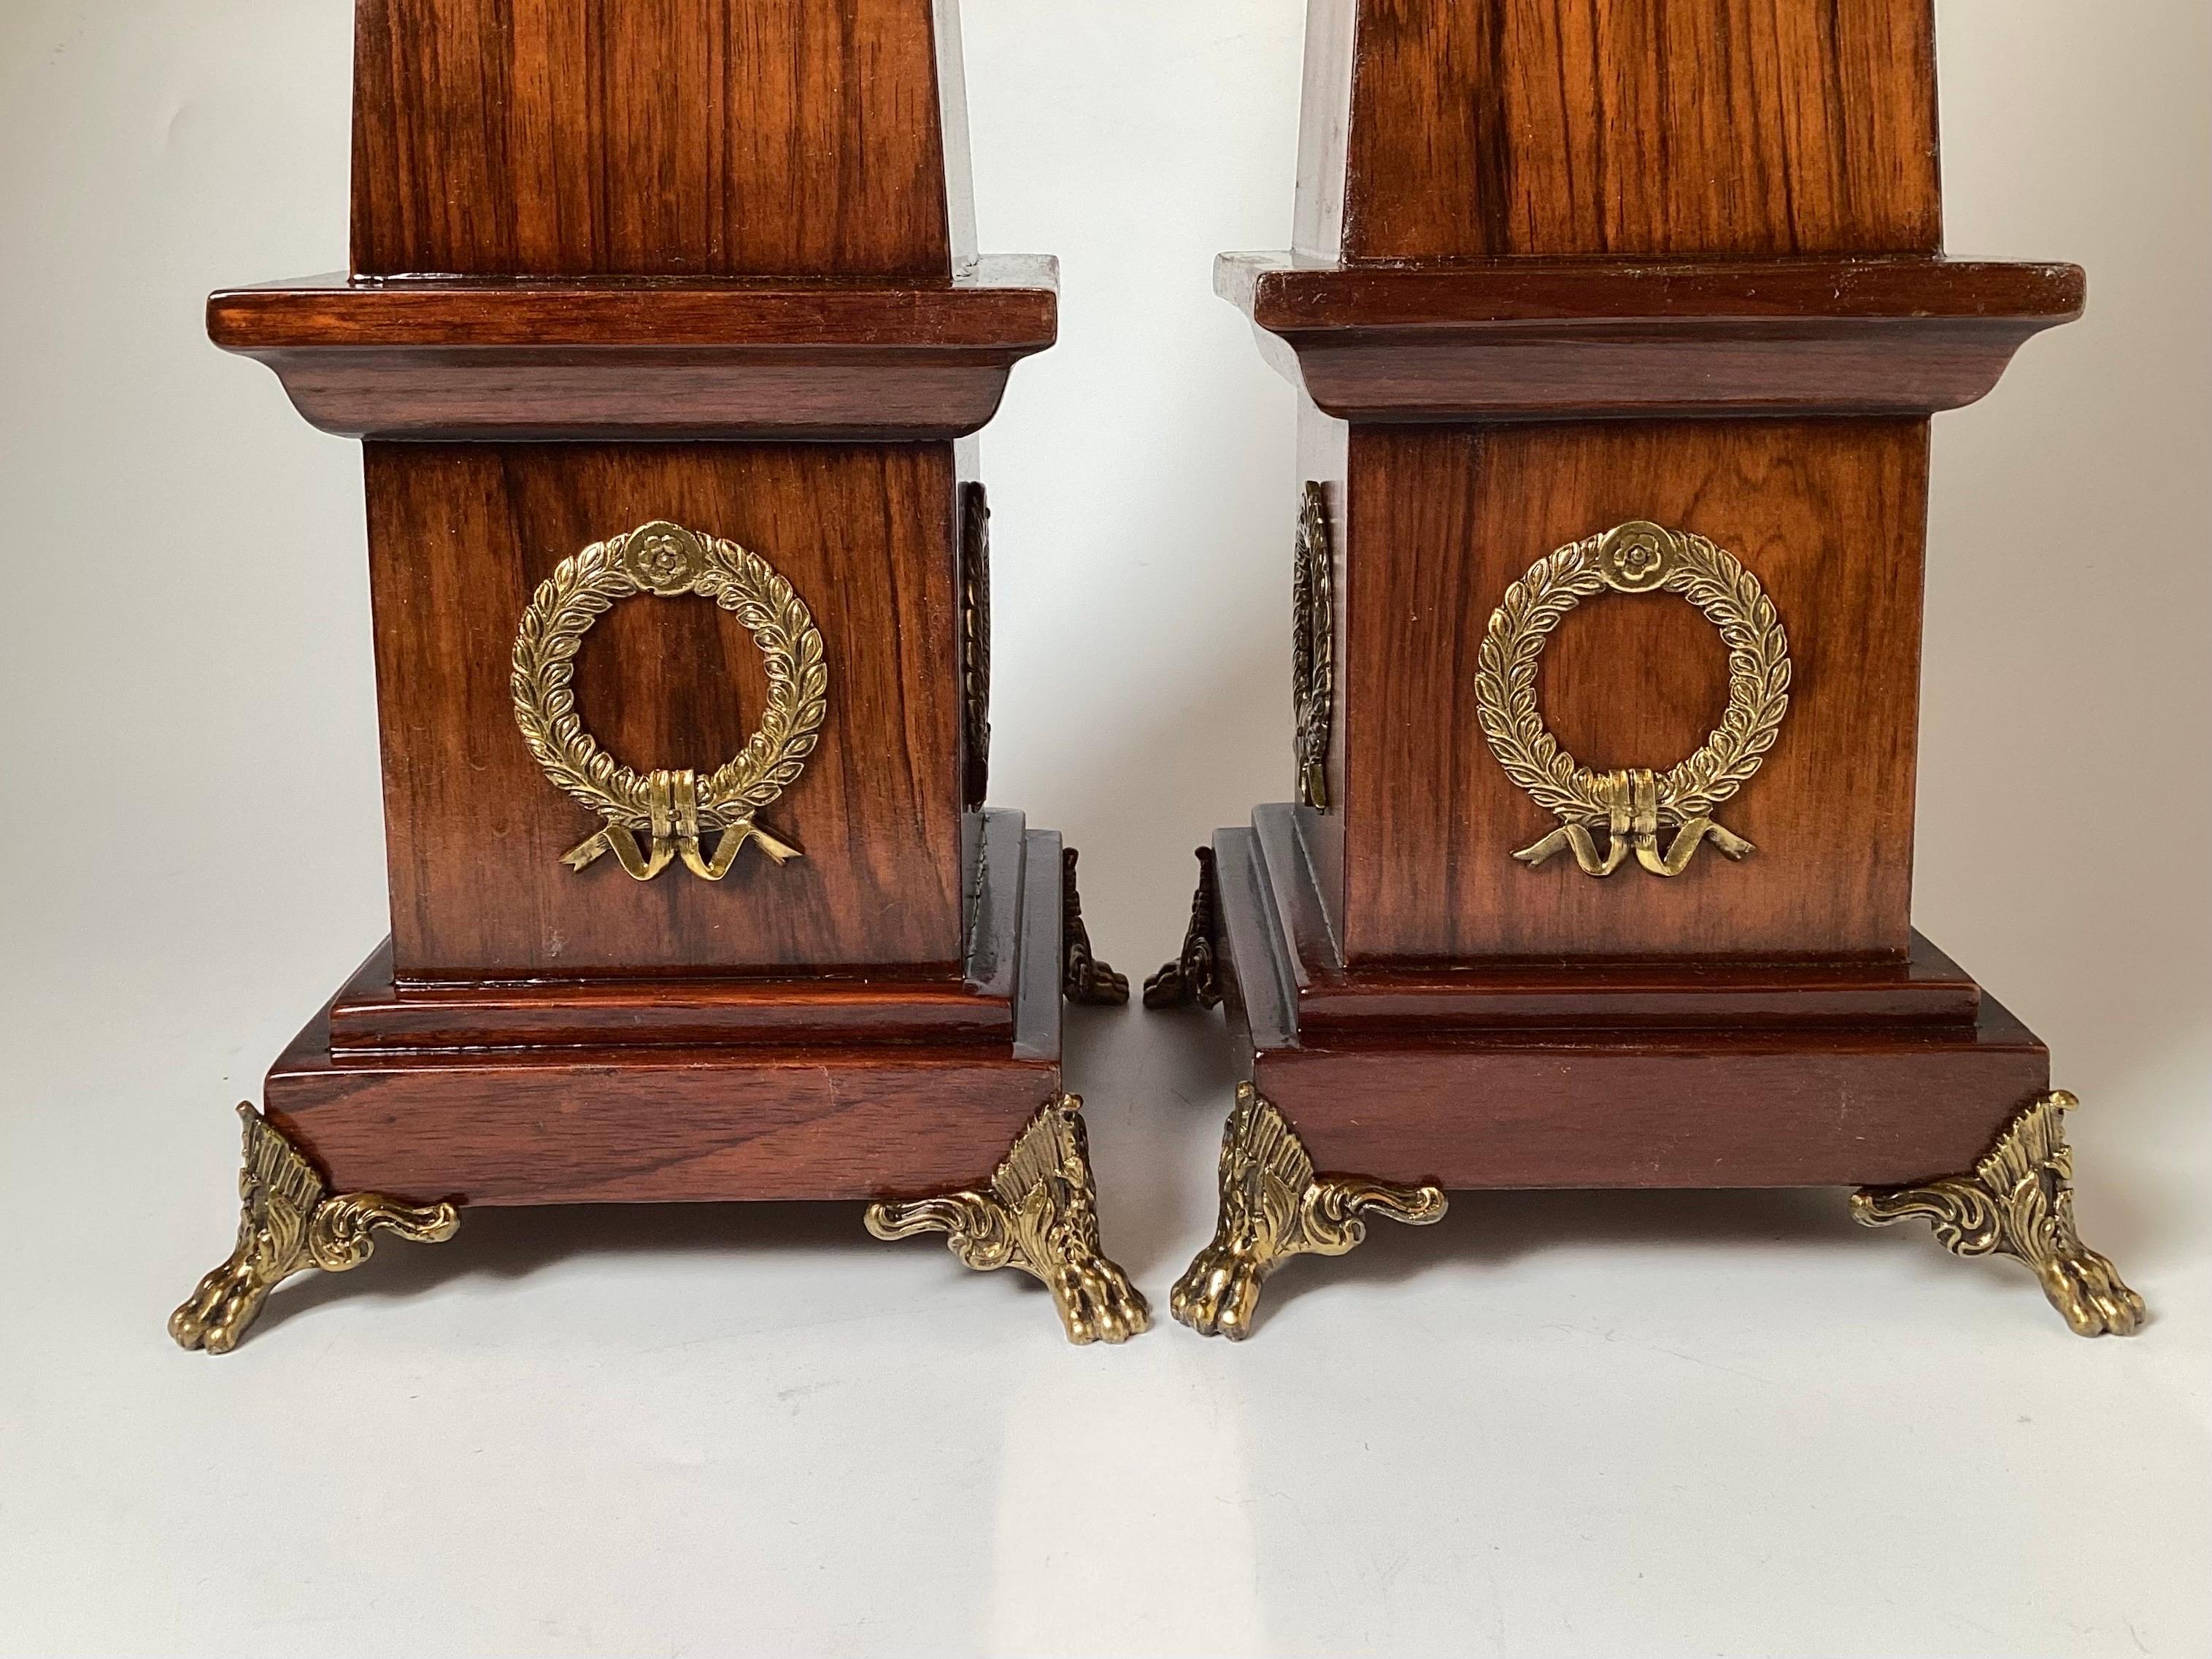 Neoclassical 20th Century Pair of Rosewood Obelisks with Decorative Brass Mounts and Feet